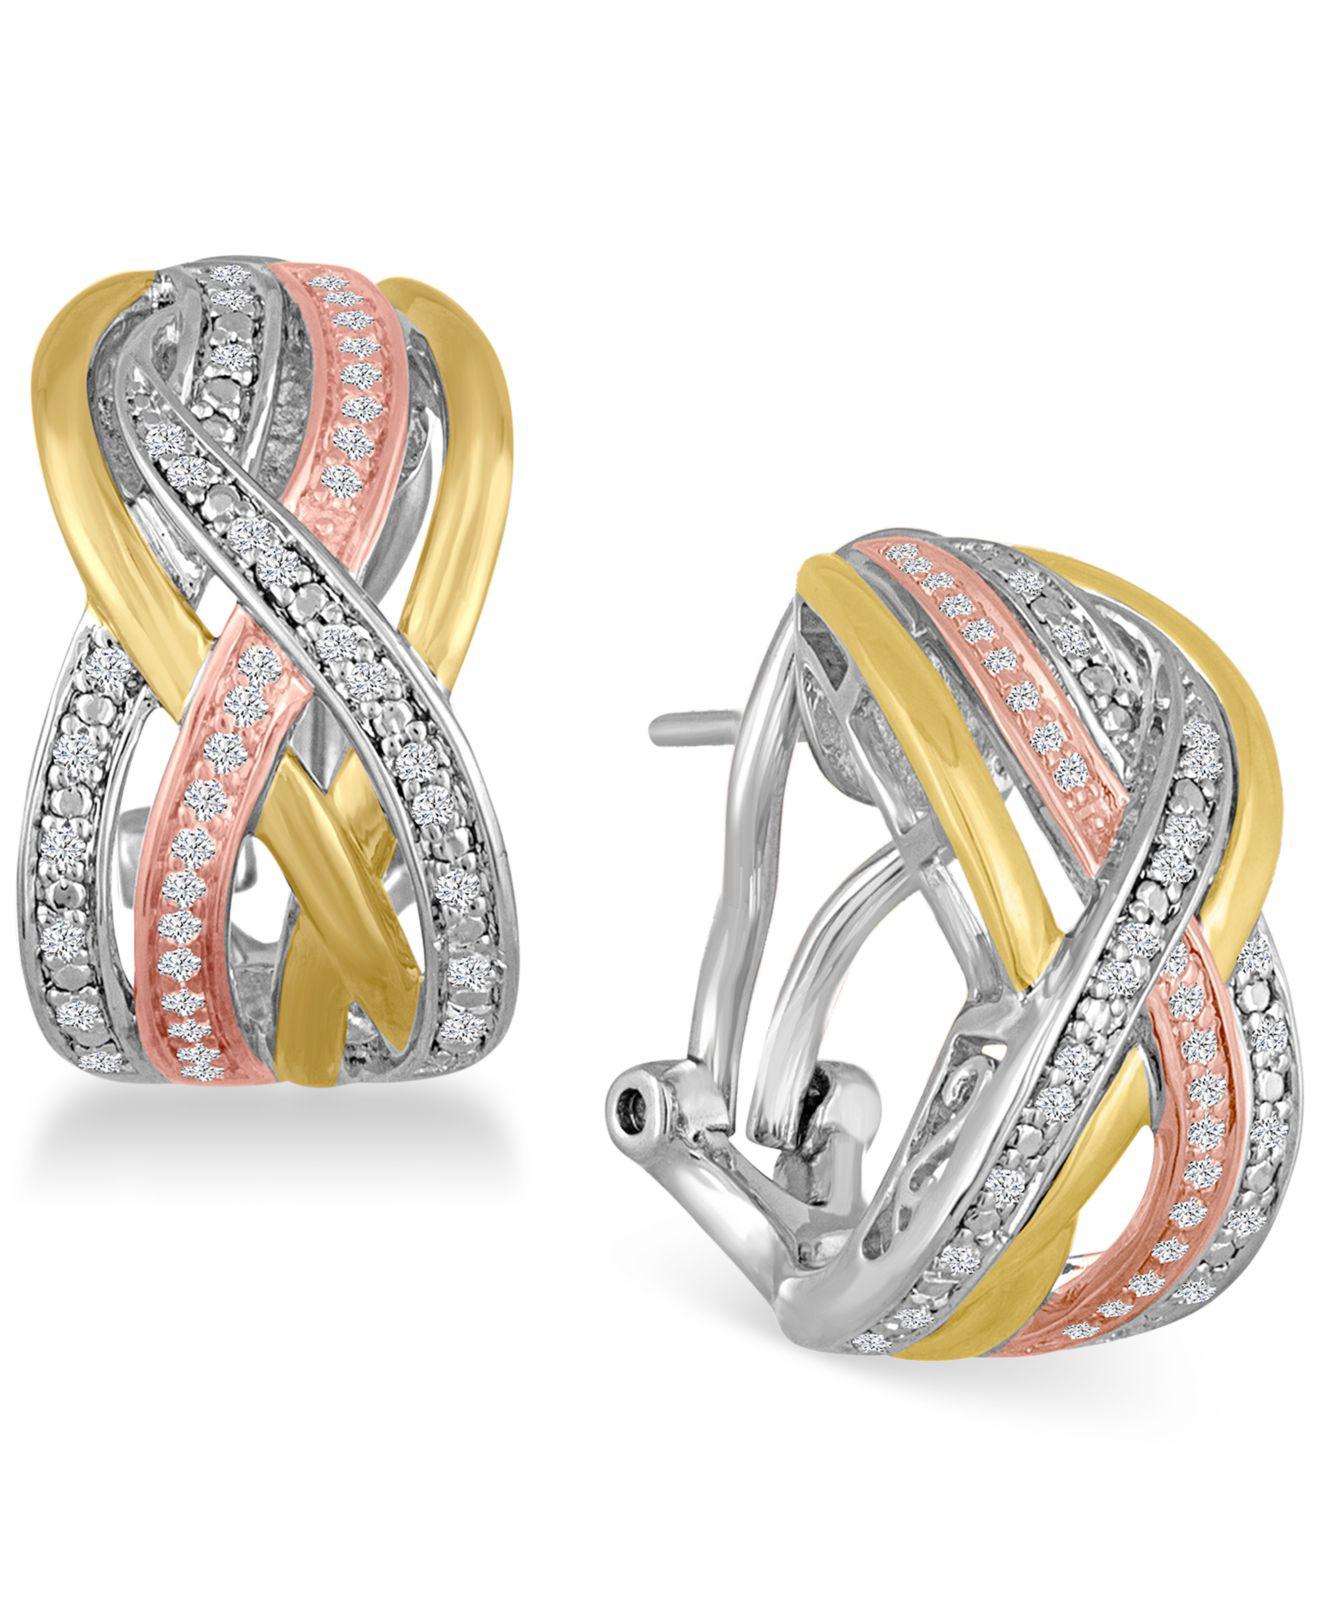 United Elegance Contemporary Large Polished Tri-Color Silver Gold /& Rose Tone Hoop Earrings